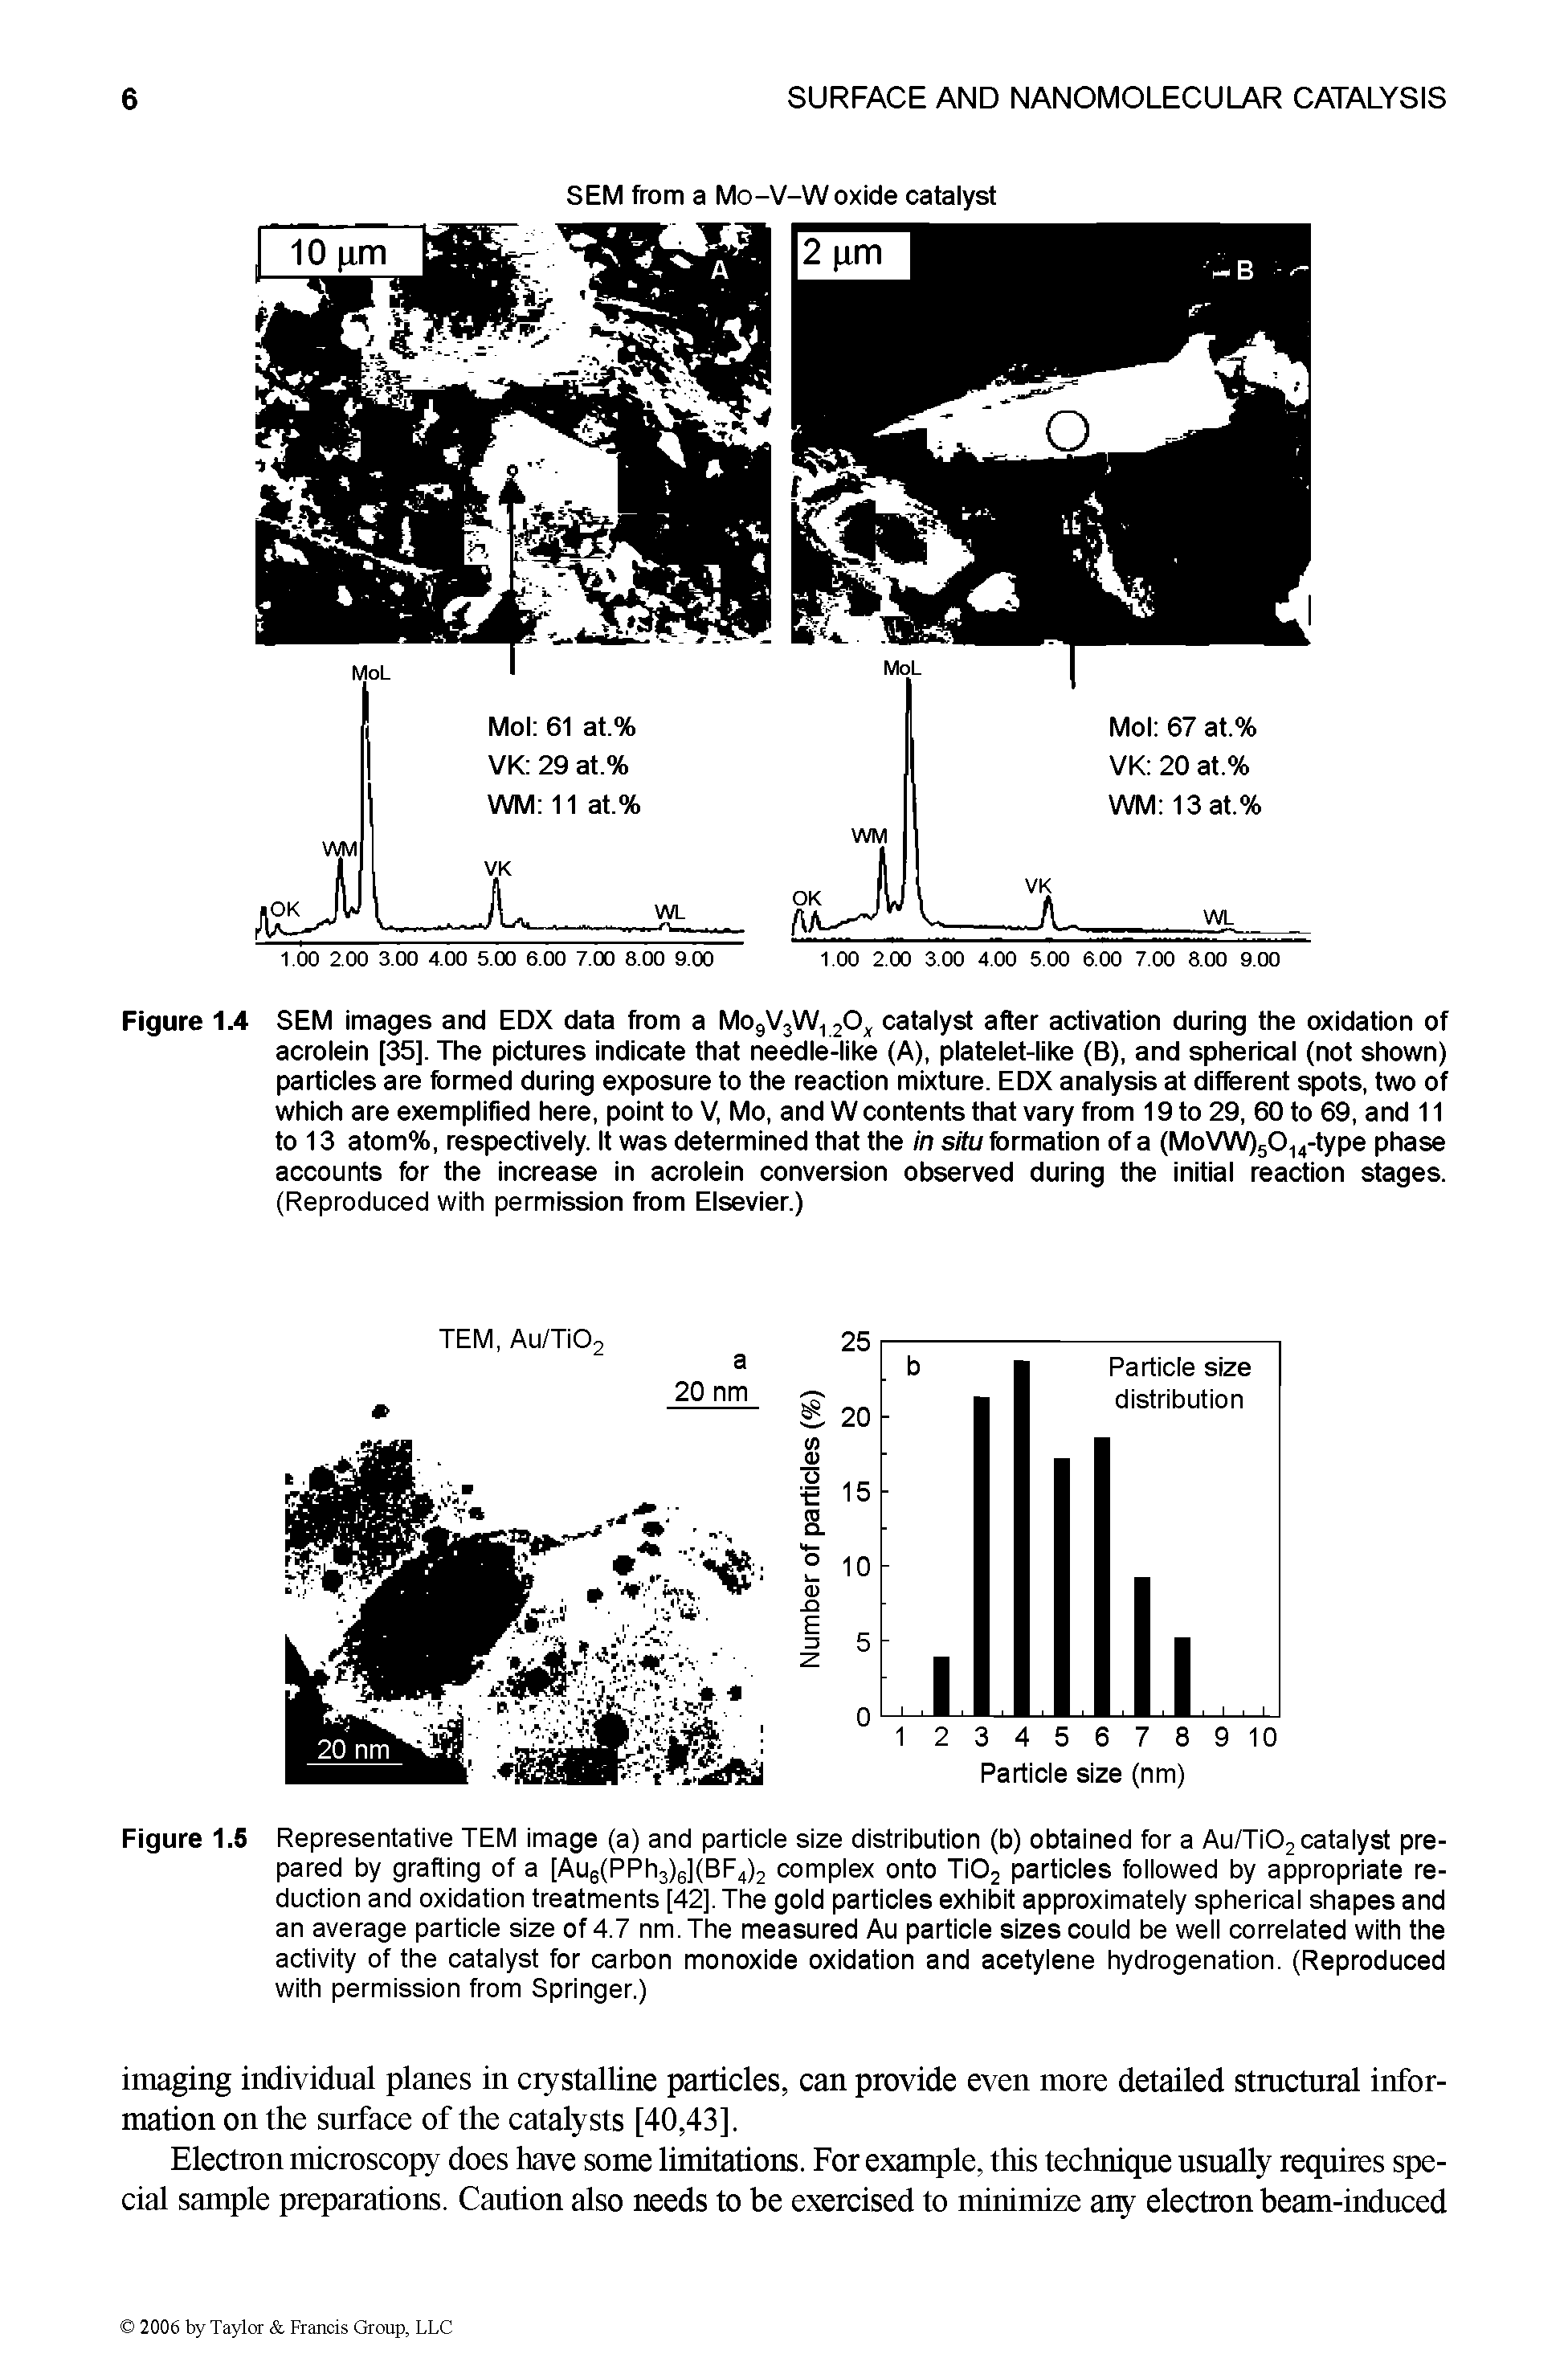 Figure 1.4 SEM images and EDX data from a Mo9V3W12Ox catalyst after activation during the oxidation of acrolein [35], The pictures indicate that needle-like (A), platelet-like (B), and spherical (not shown) particles are formed during exposure to the reaction mixture. EDX analysis at different spots, two of which are exemplified here, point to V, Mo, and W contents that vary from 19 to 29, 60 to 69, and 11 to 13 atom%, respectively. It was determined that the in situ formation of a (MoVW)5014-type phase accounts for the increase in acrolein conversion observed during the initial reaction stages. (Reproduced with permission from Elsevier.)...